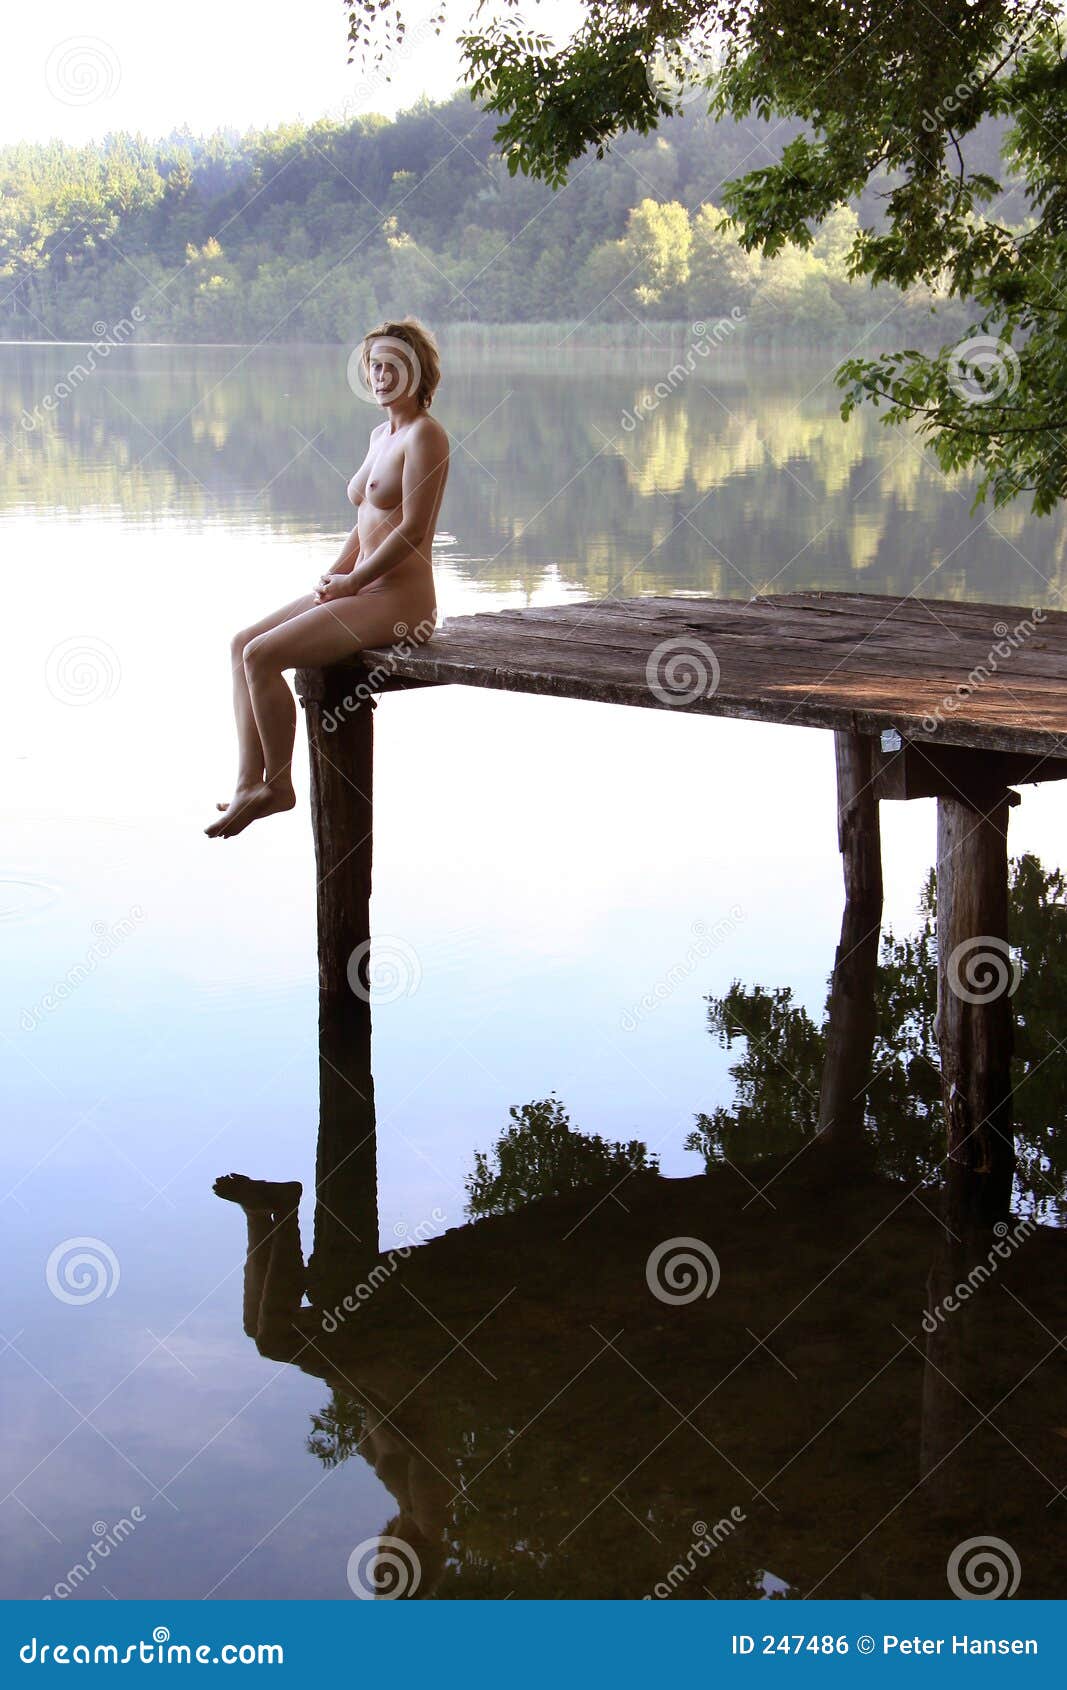 Lake the nude by 